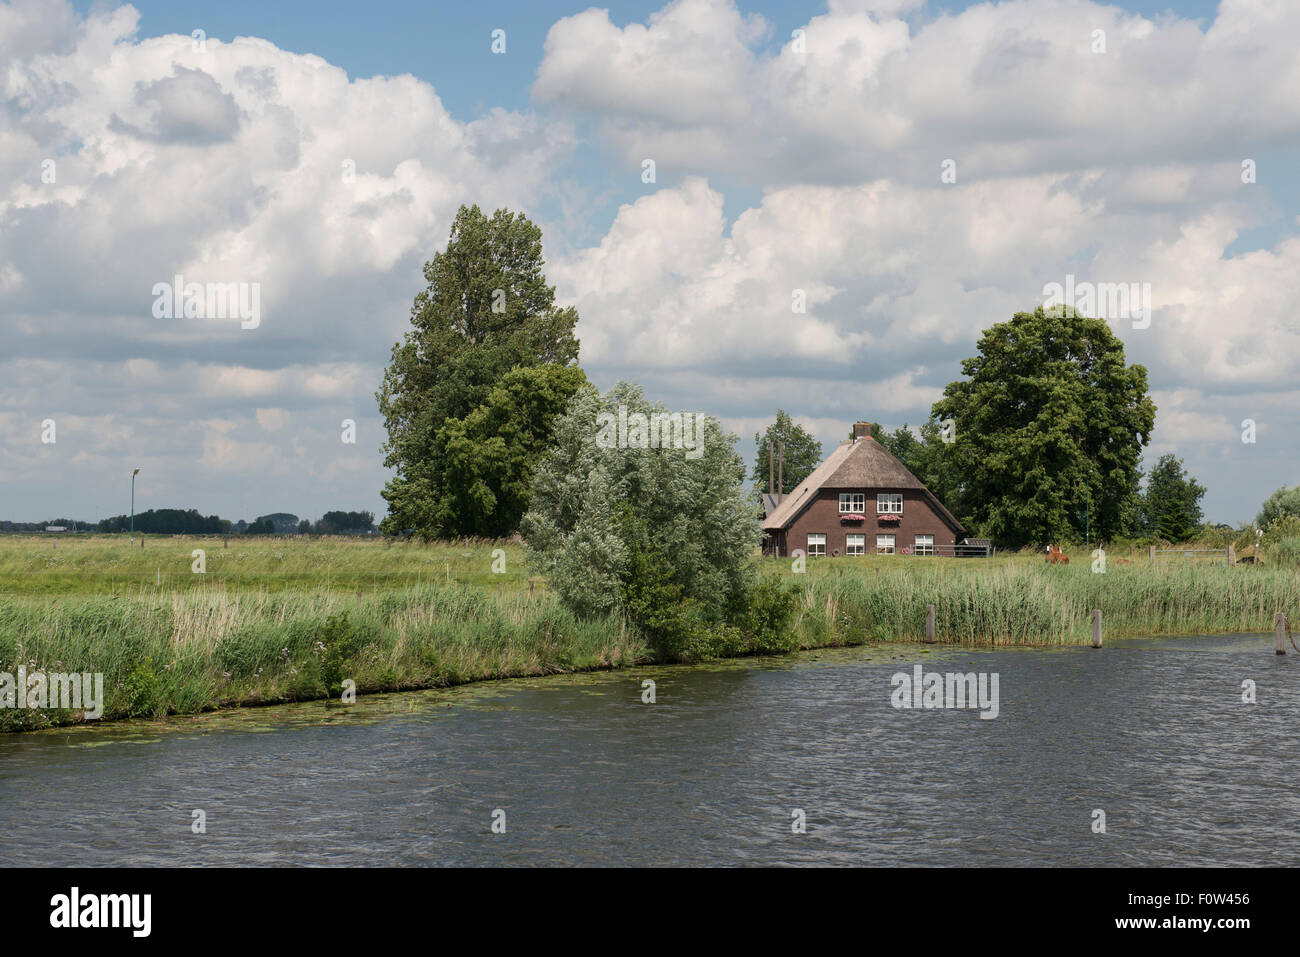 Farm house with thatched roof and trees on the banks of a canal, Amersfoort, Netherlands Stock Photo